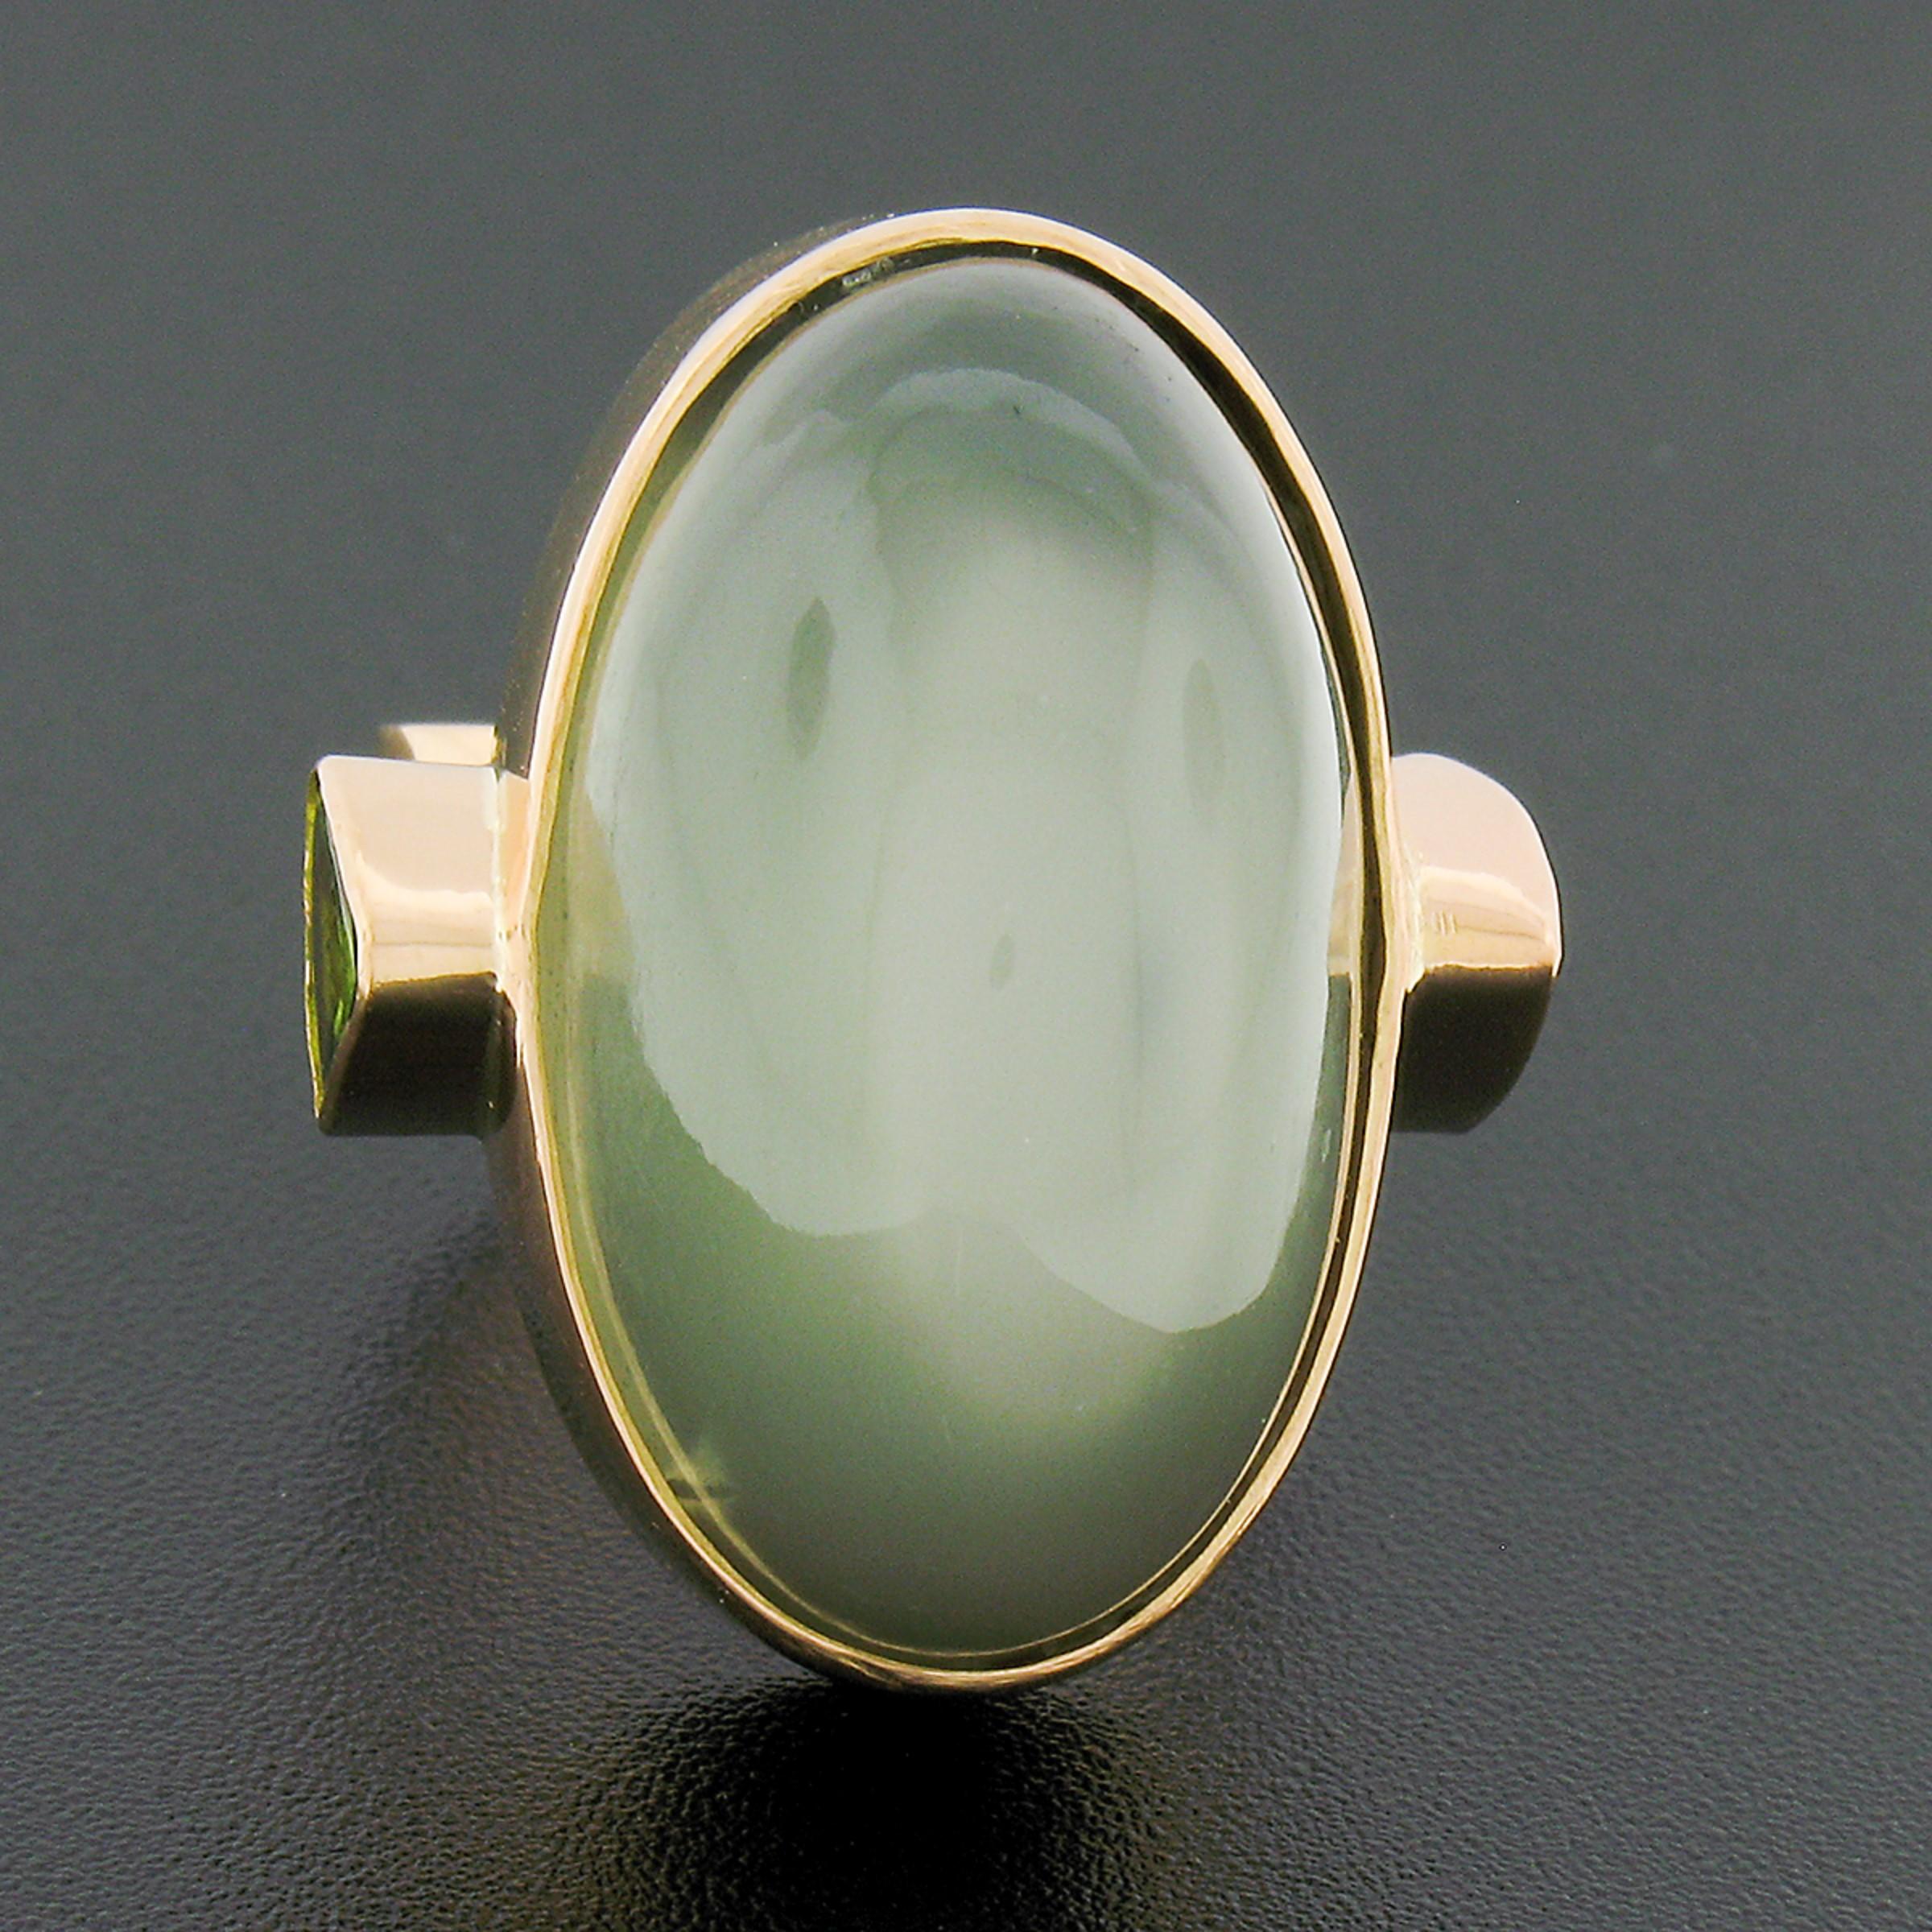 Here we have a truly bold vintage cocktail ring crafted in solid 22k rose gold and features a large, GIA certified, oval cabochon cut cat's-eye moonstone neatly bezel set at the center. The solitaire has a beautiful grayish-green base color that